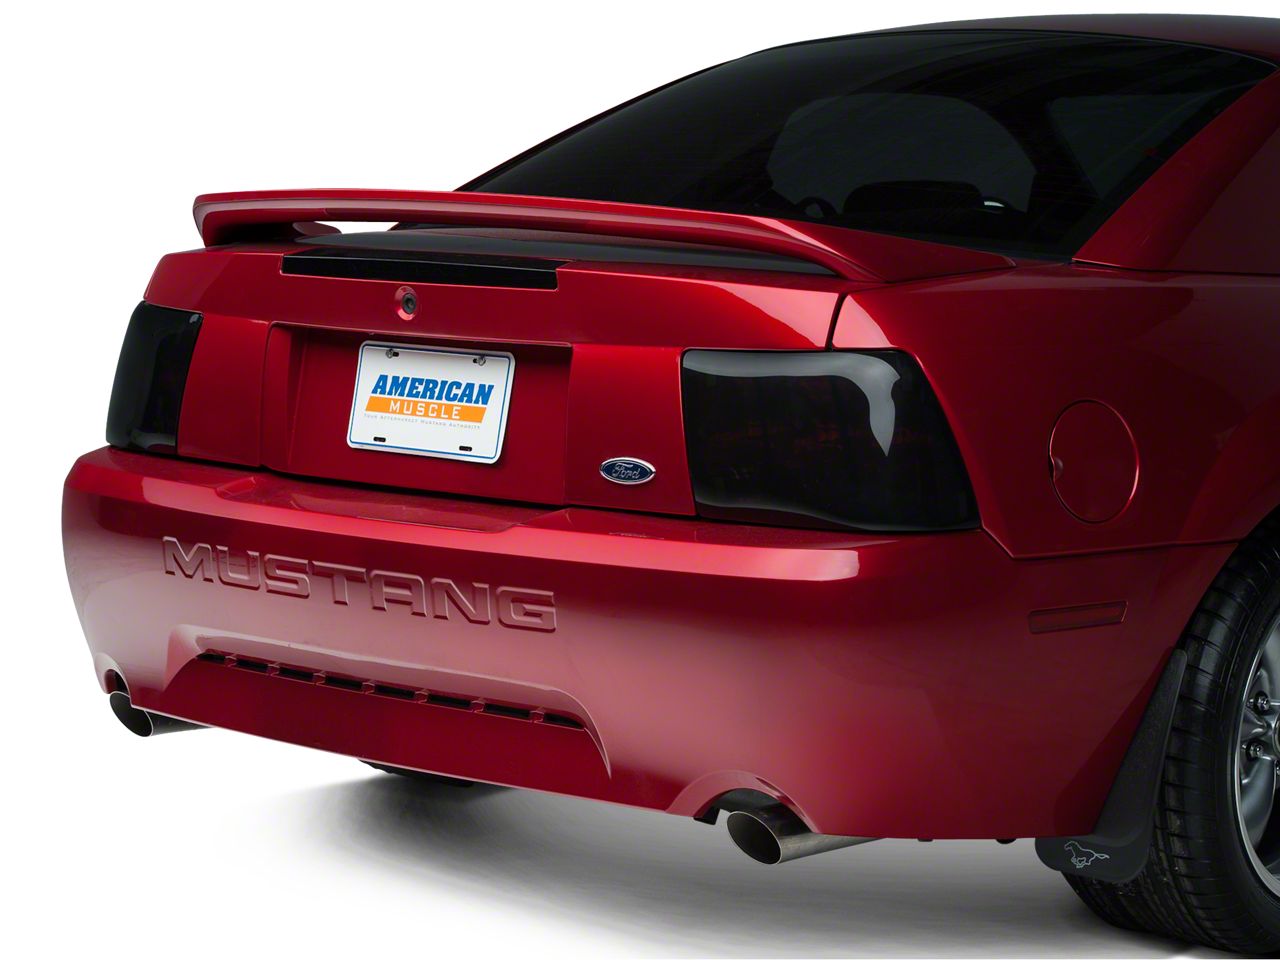 Mustang Light Covers & Tint 1999-2004